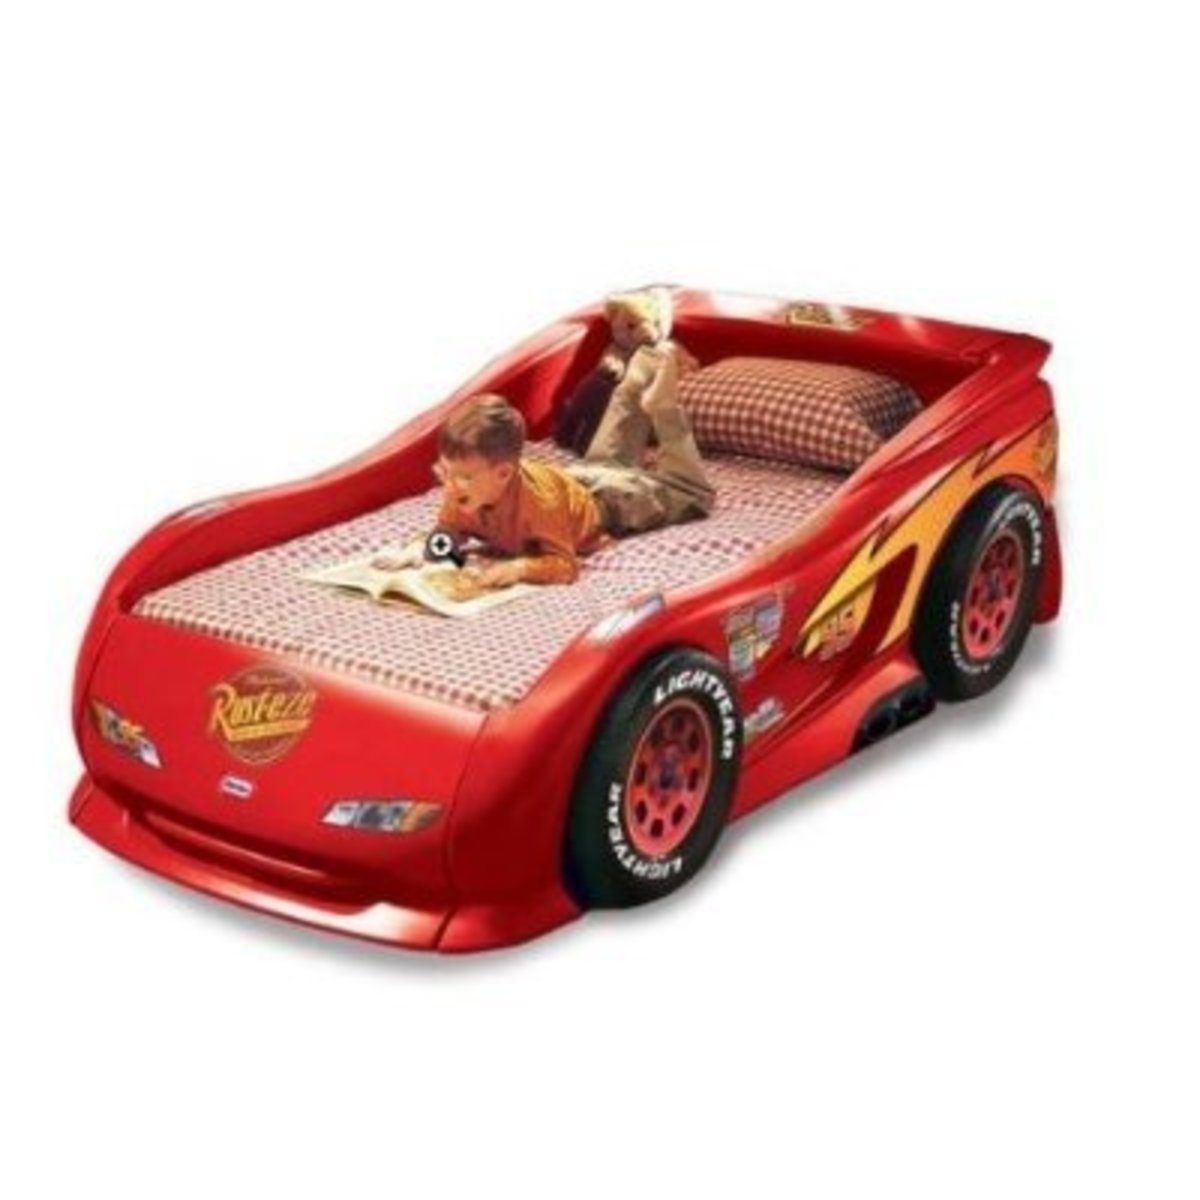 Little Tikes Race Car Bed: A Buyer's Guide